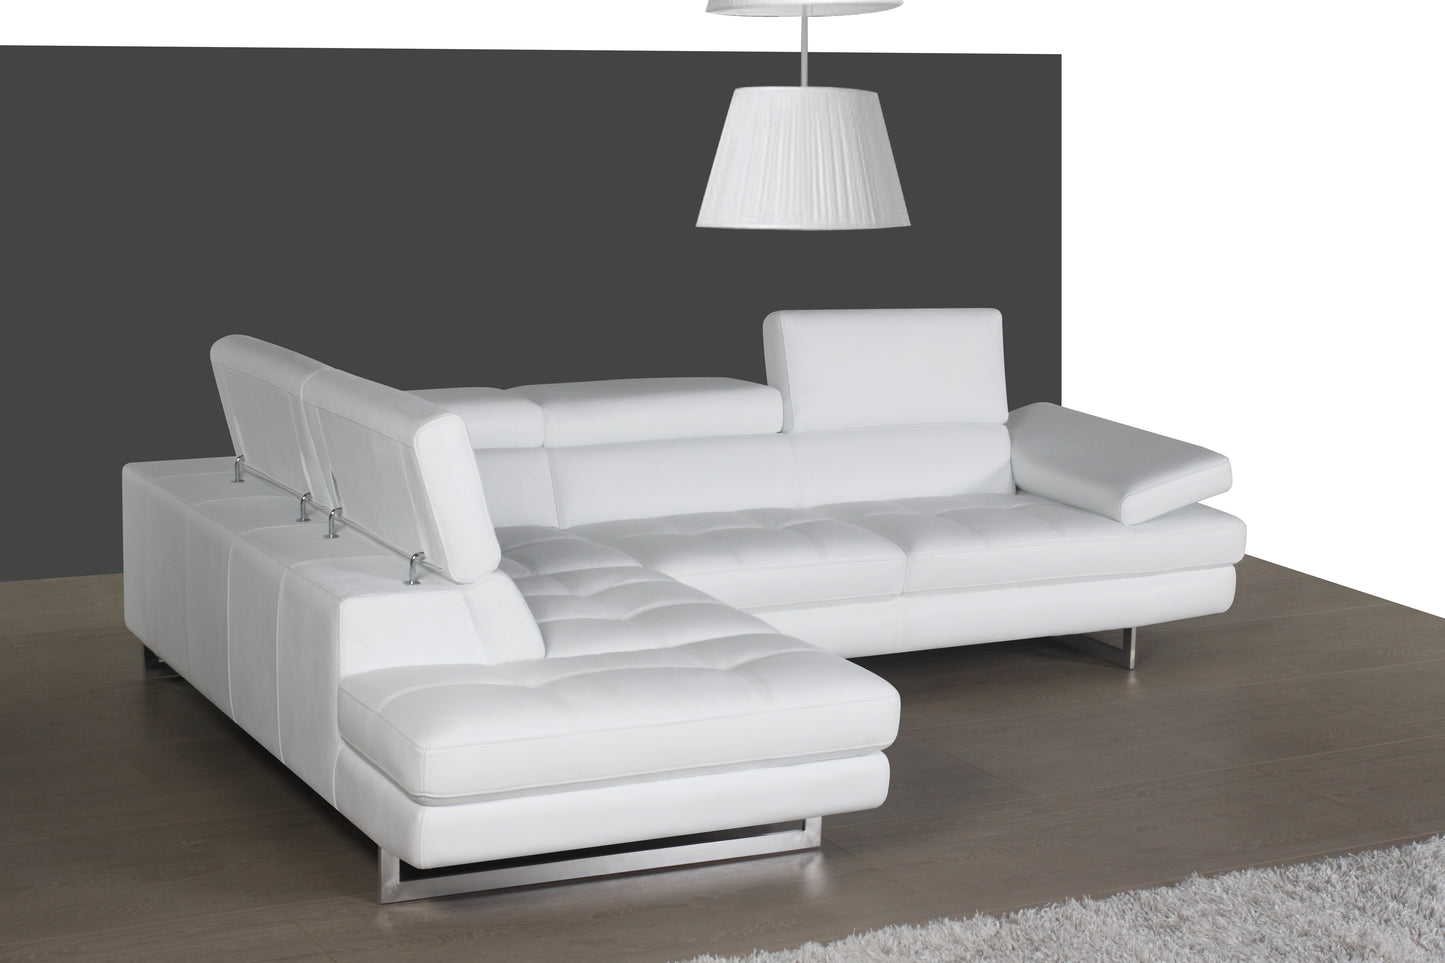 A761 Italian Leather Sectional Sofa Snow White LHF by JM